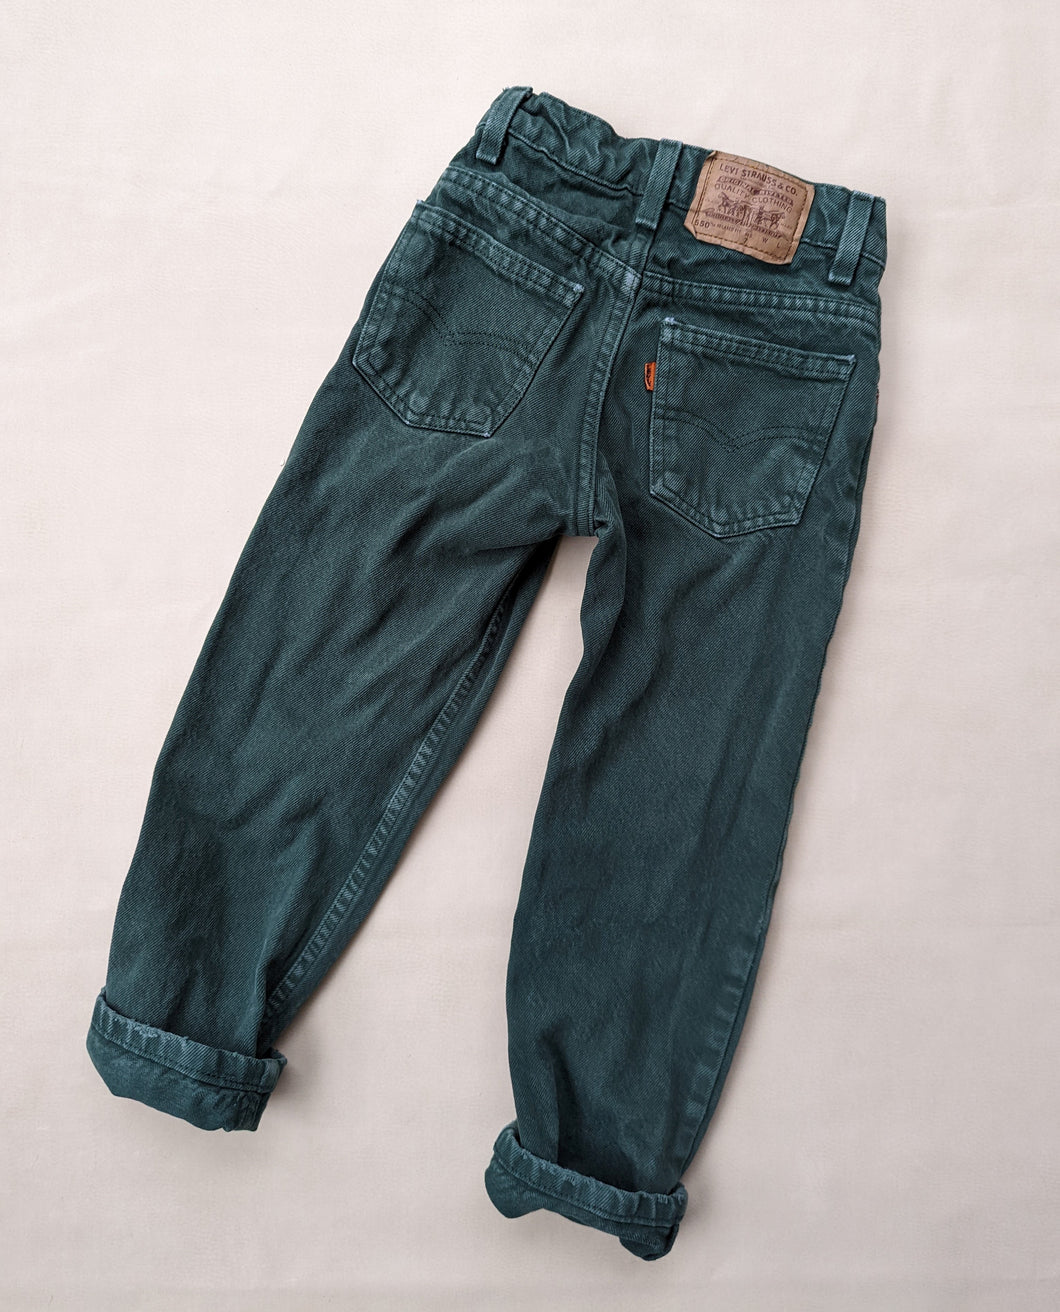 Levi's Green Distressed Jeans 7y